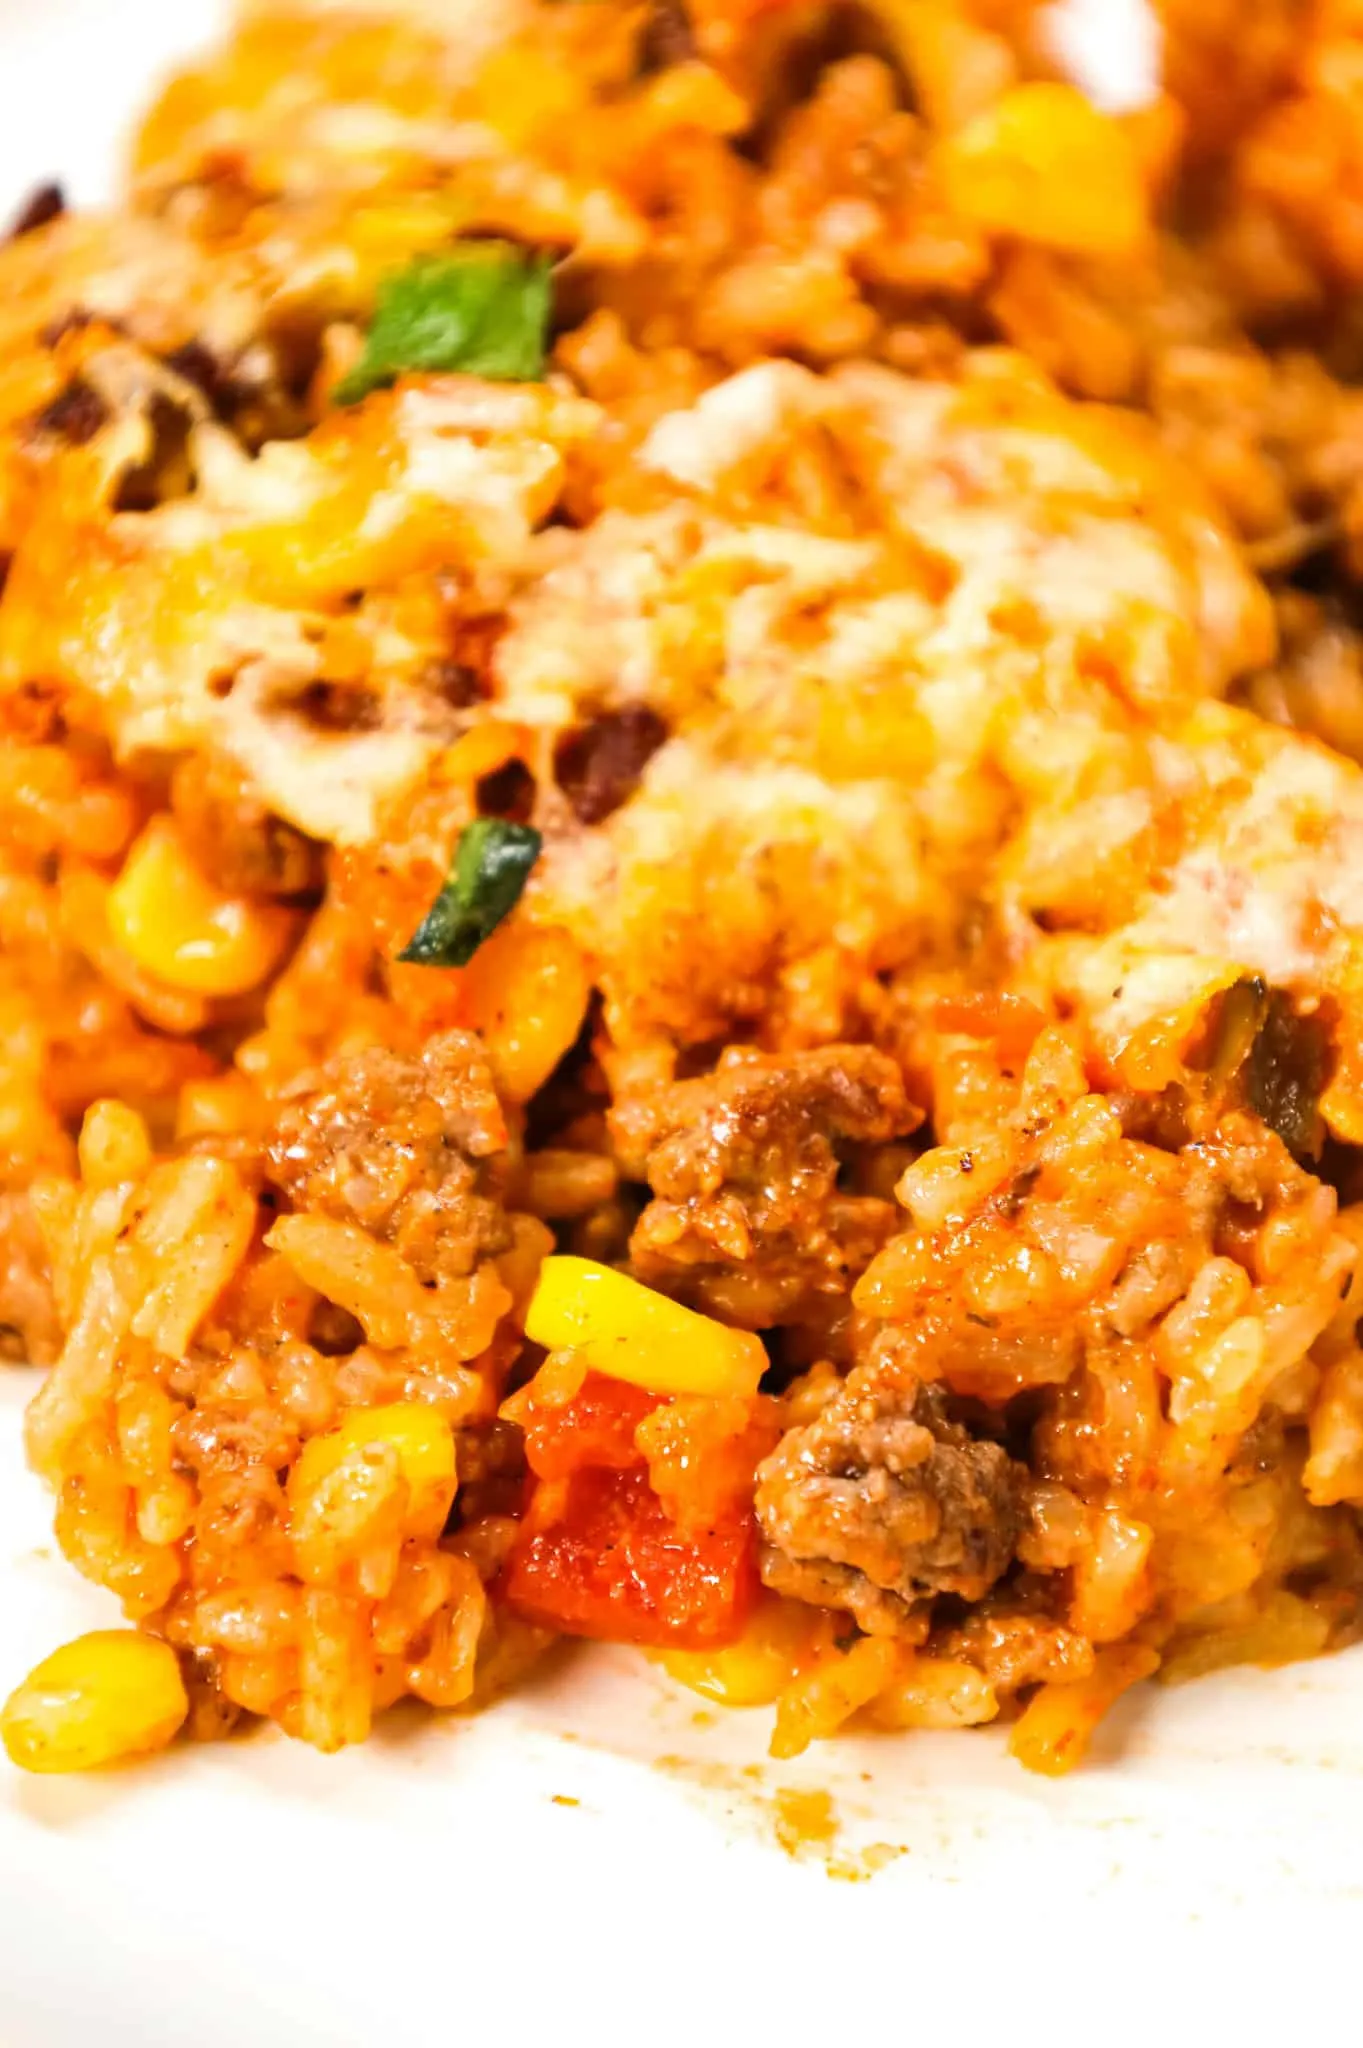 Taco Rice Casserole is a hearty ground beef casserole loaded with instant rice, condensed cheddar soup, corn, salsa, taco seasoning, ranch dressing mix, chopped green onions and a shredded Mexican cheese blend.